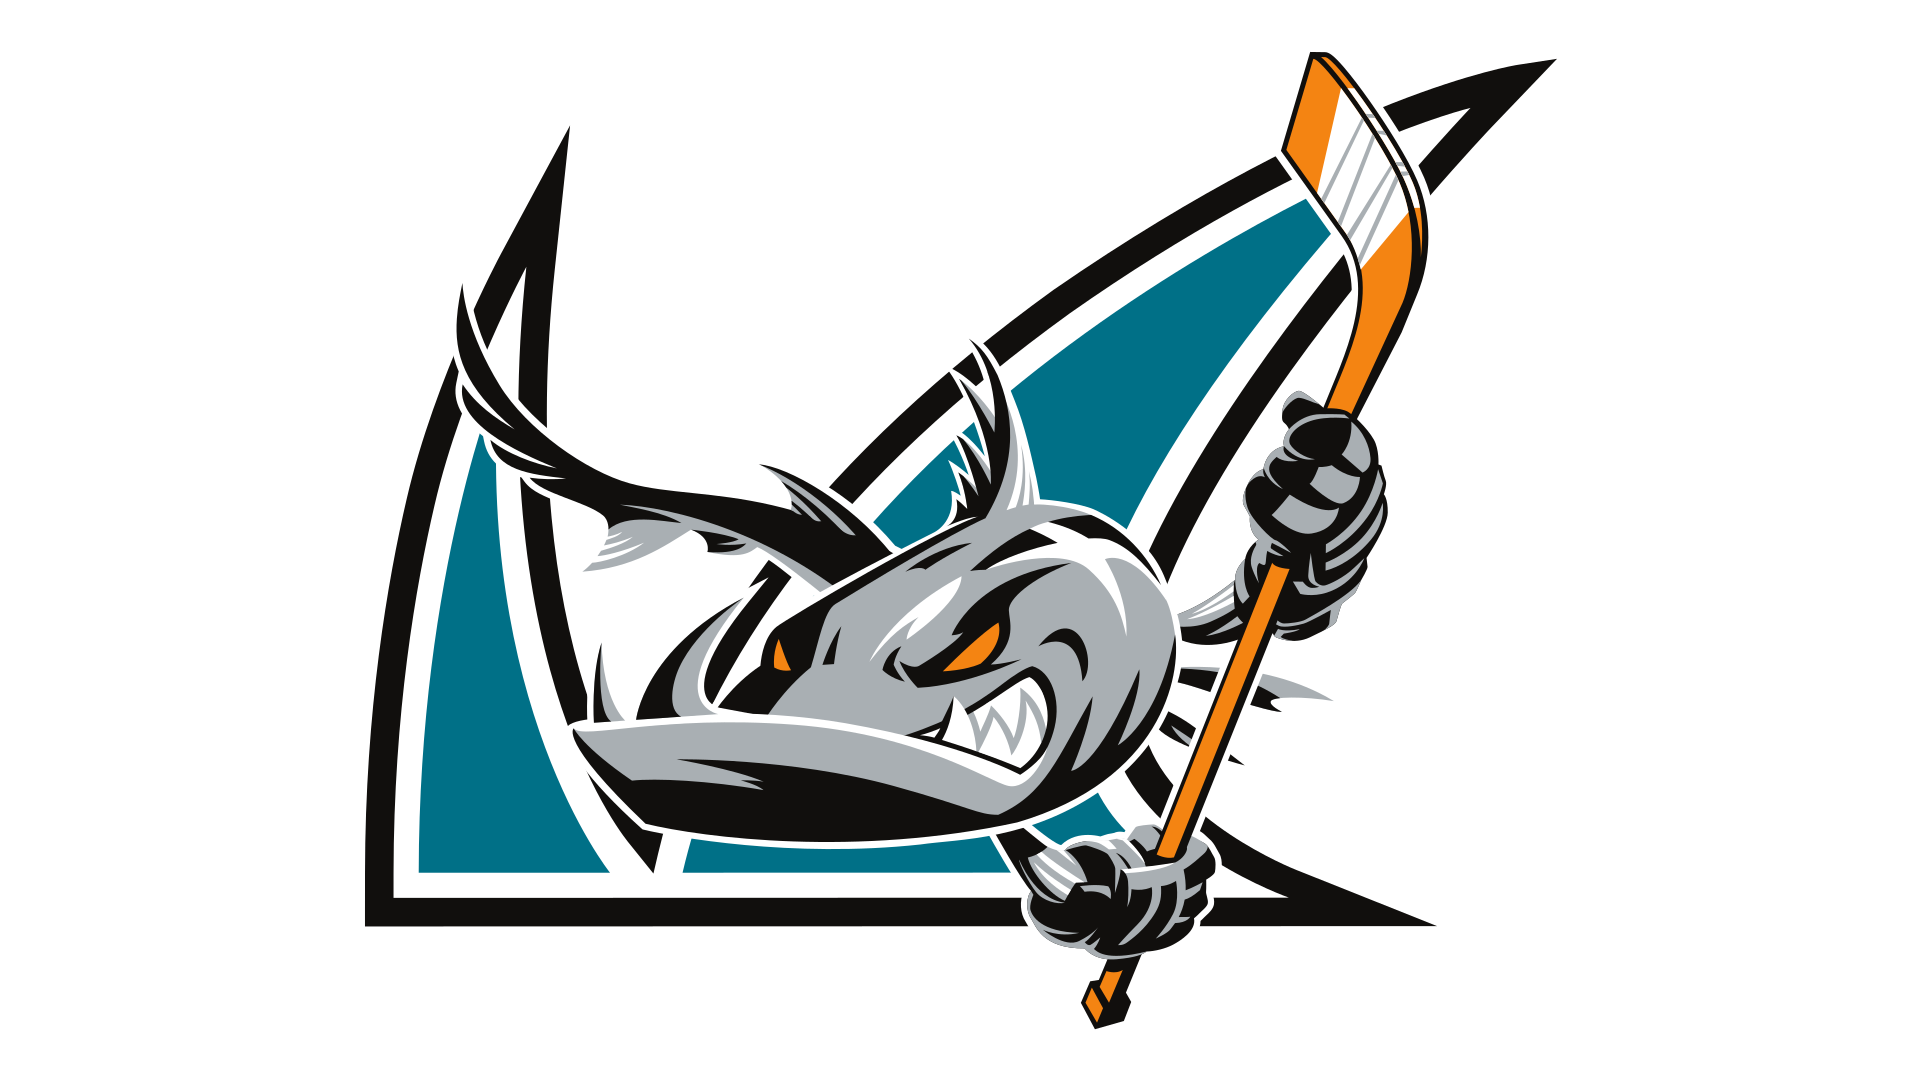 San Jose Barracuda Introduced Mascot Frenzy Before the Barracuda -  OurSports Central